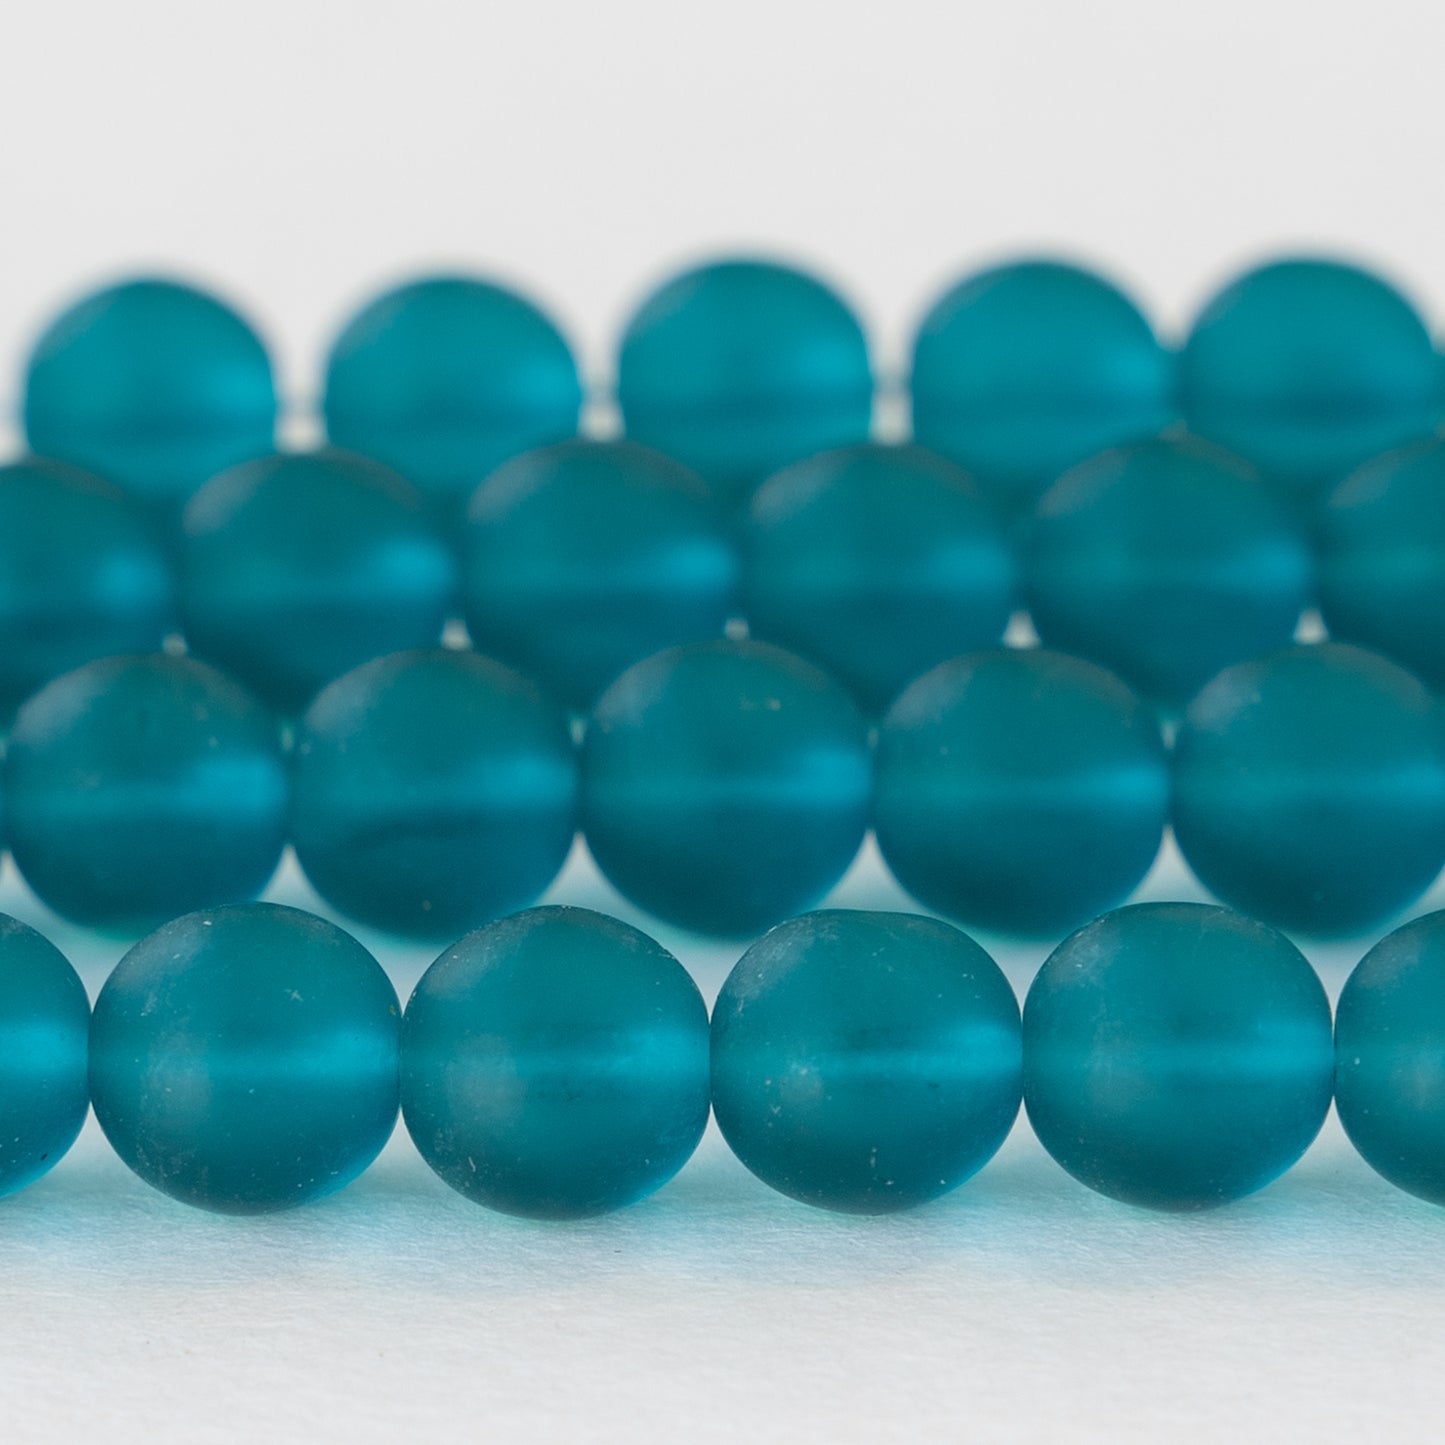 8mm Frosted Glass Rounds - Blue Teal - 50